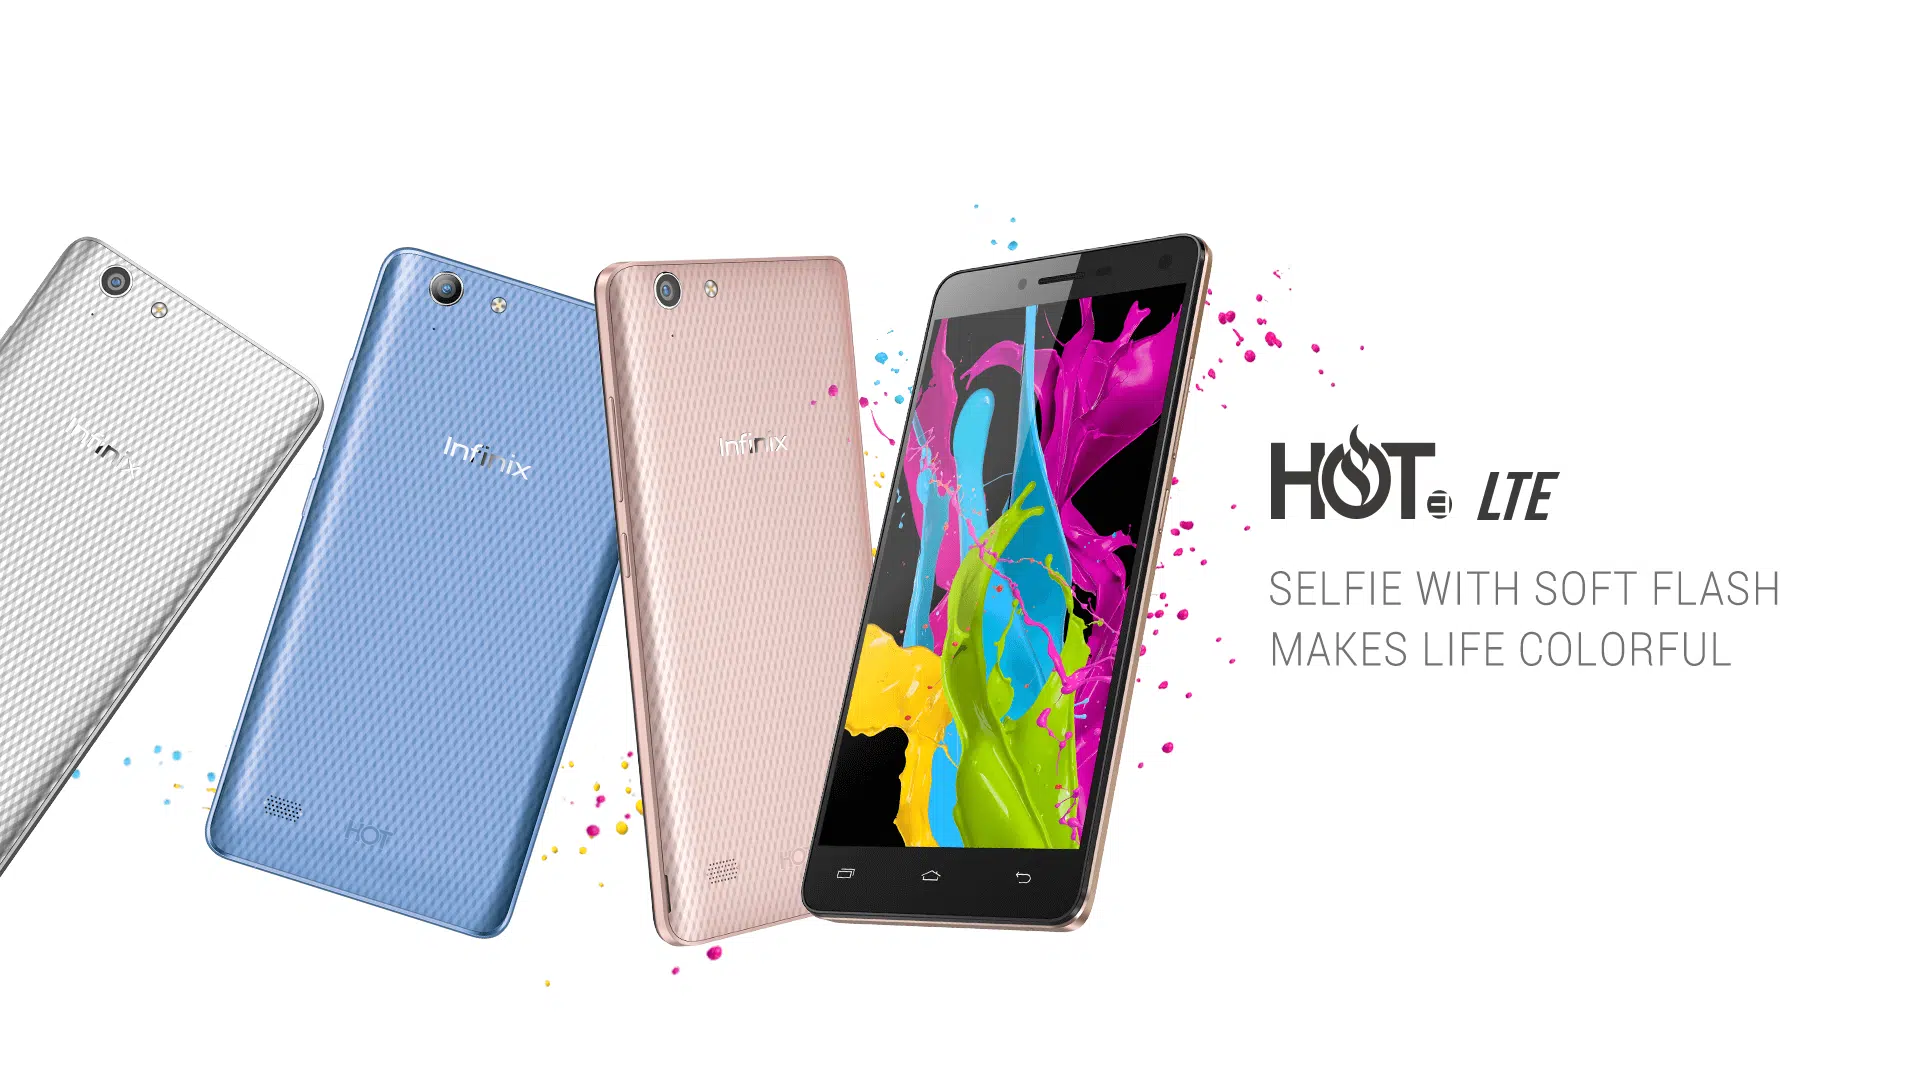 Infinix Hot 3 lte android